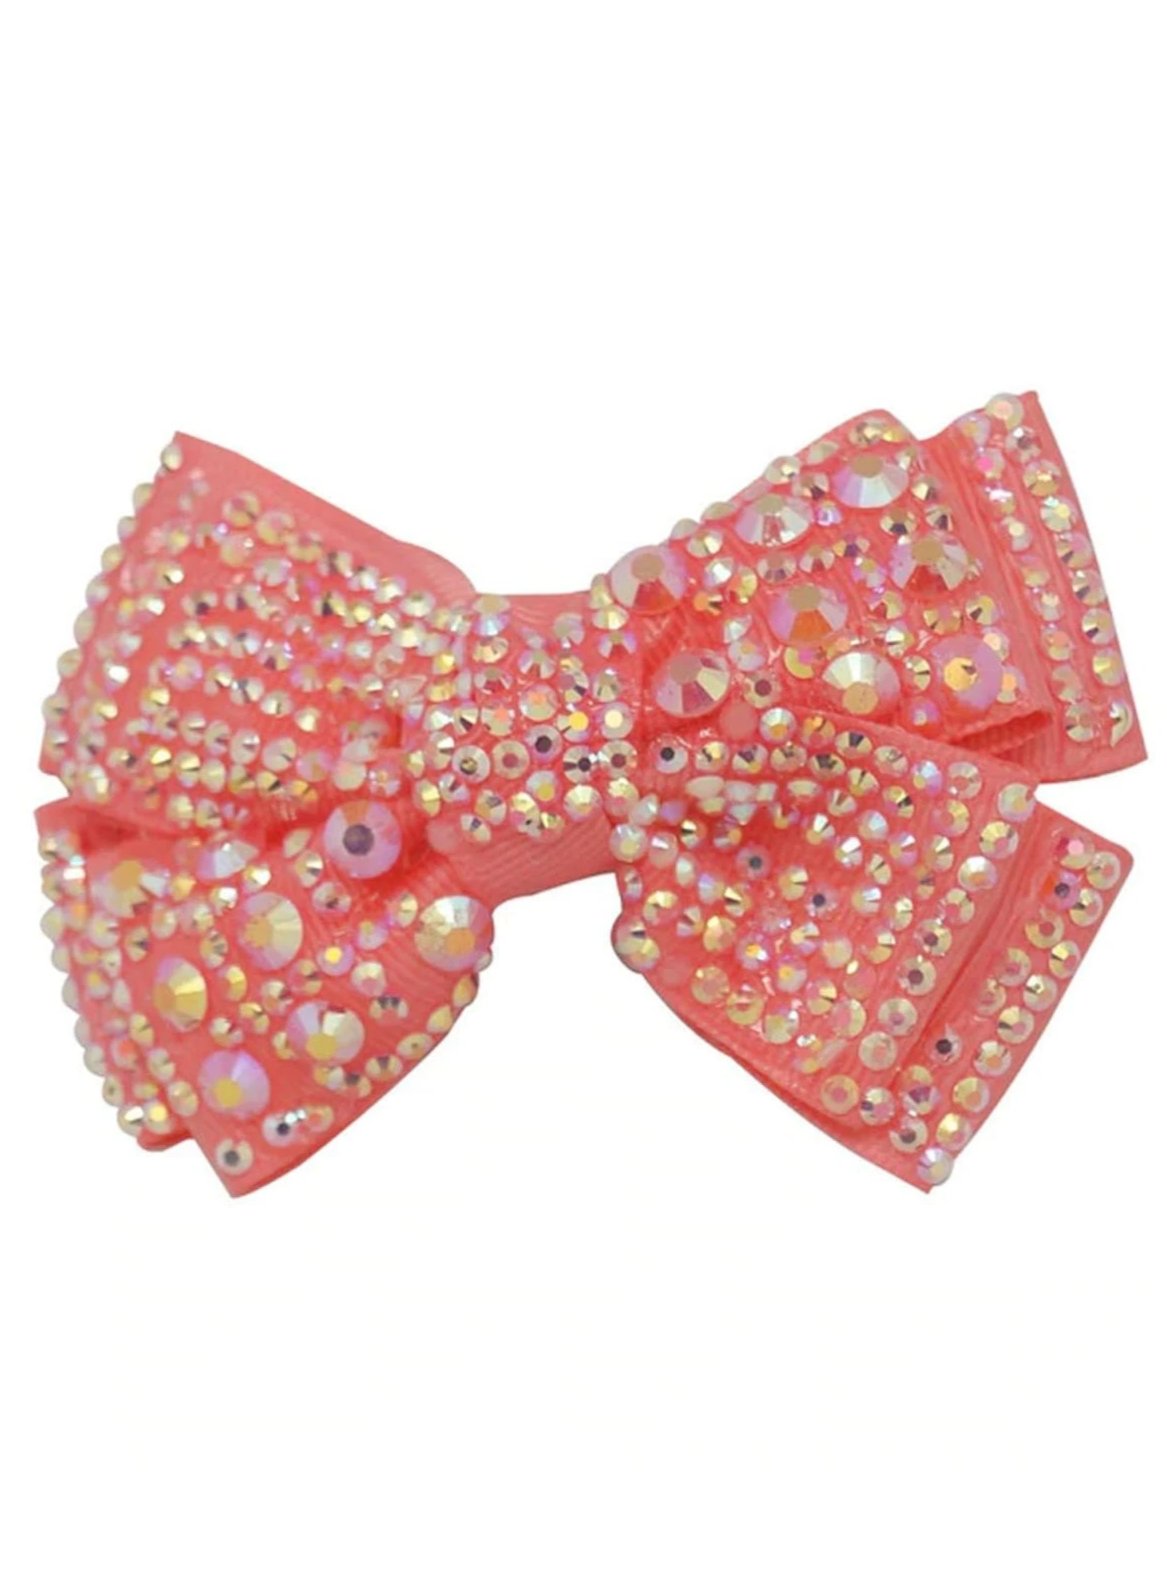 Girls Crystal Rhinestone Embellished Bow Hair Clips - Coral - Hair Accessories